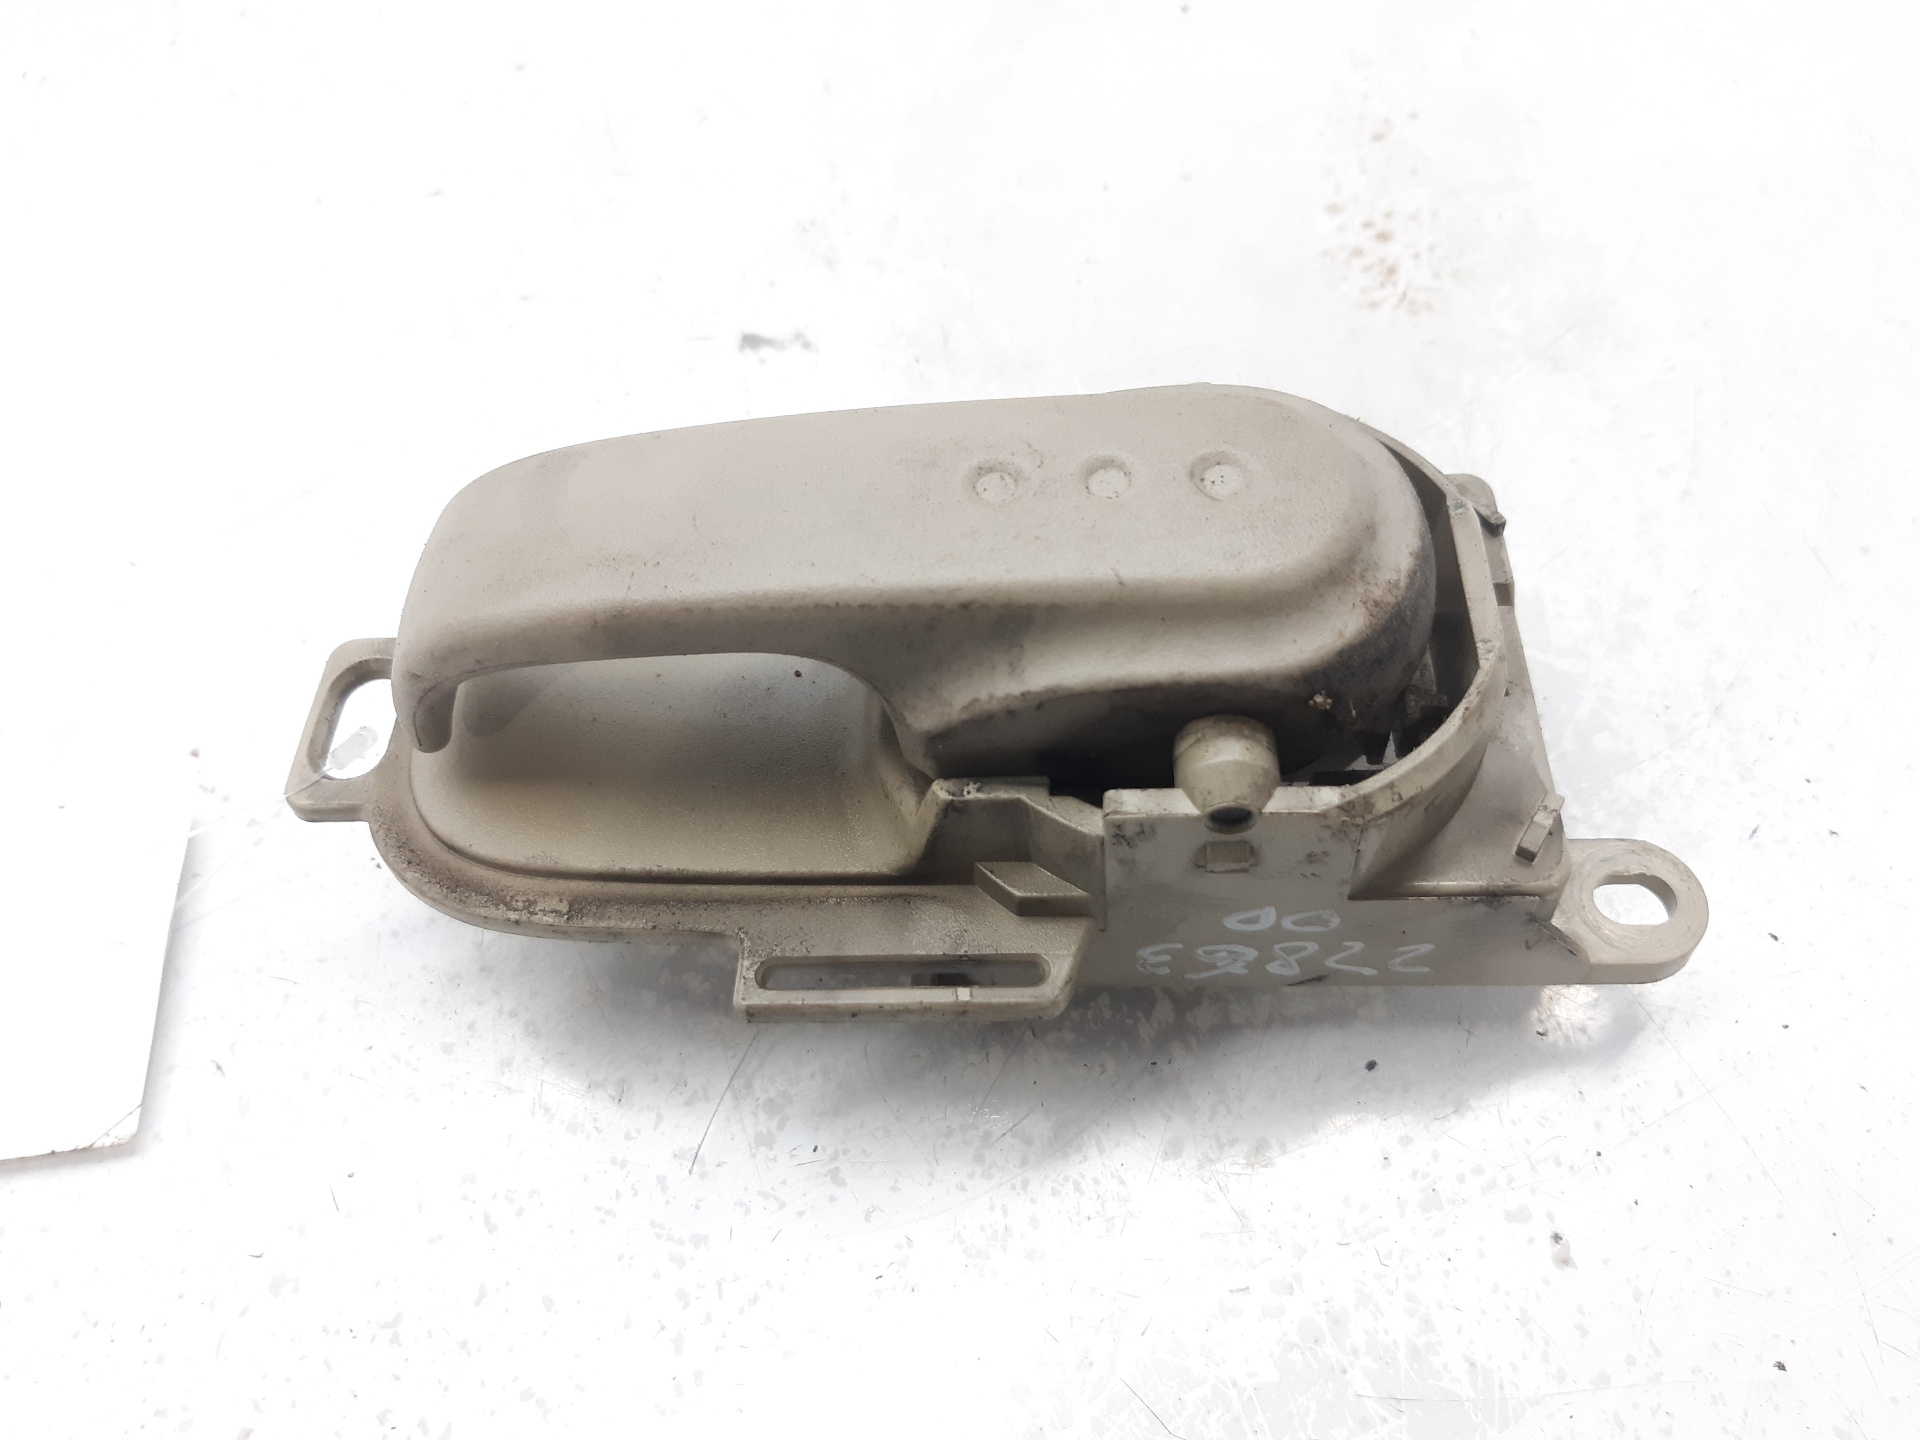 NISSAN Micra K12 (2002-2010) Other Interior Parts 80670AX600 24128712